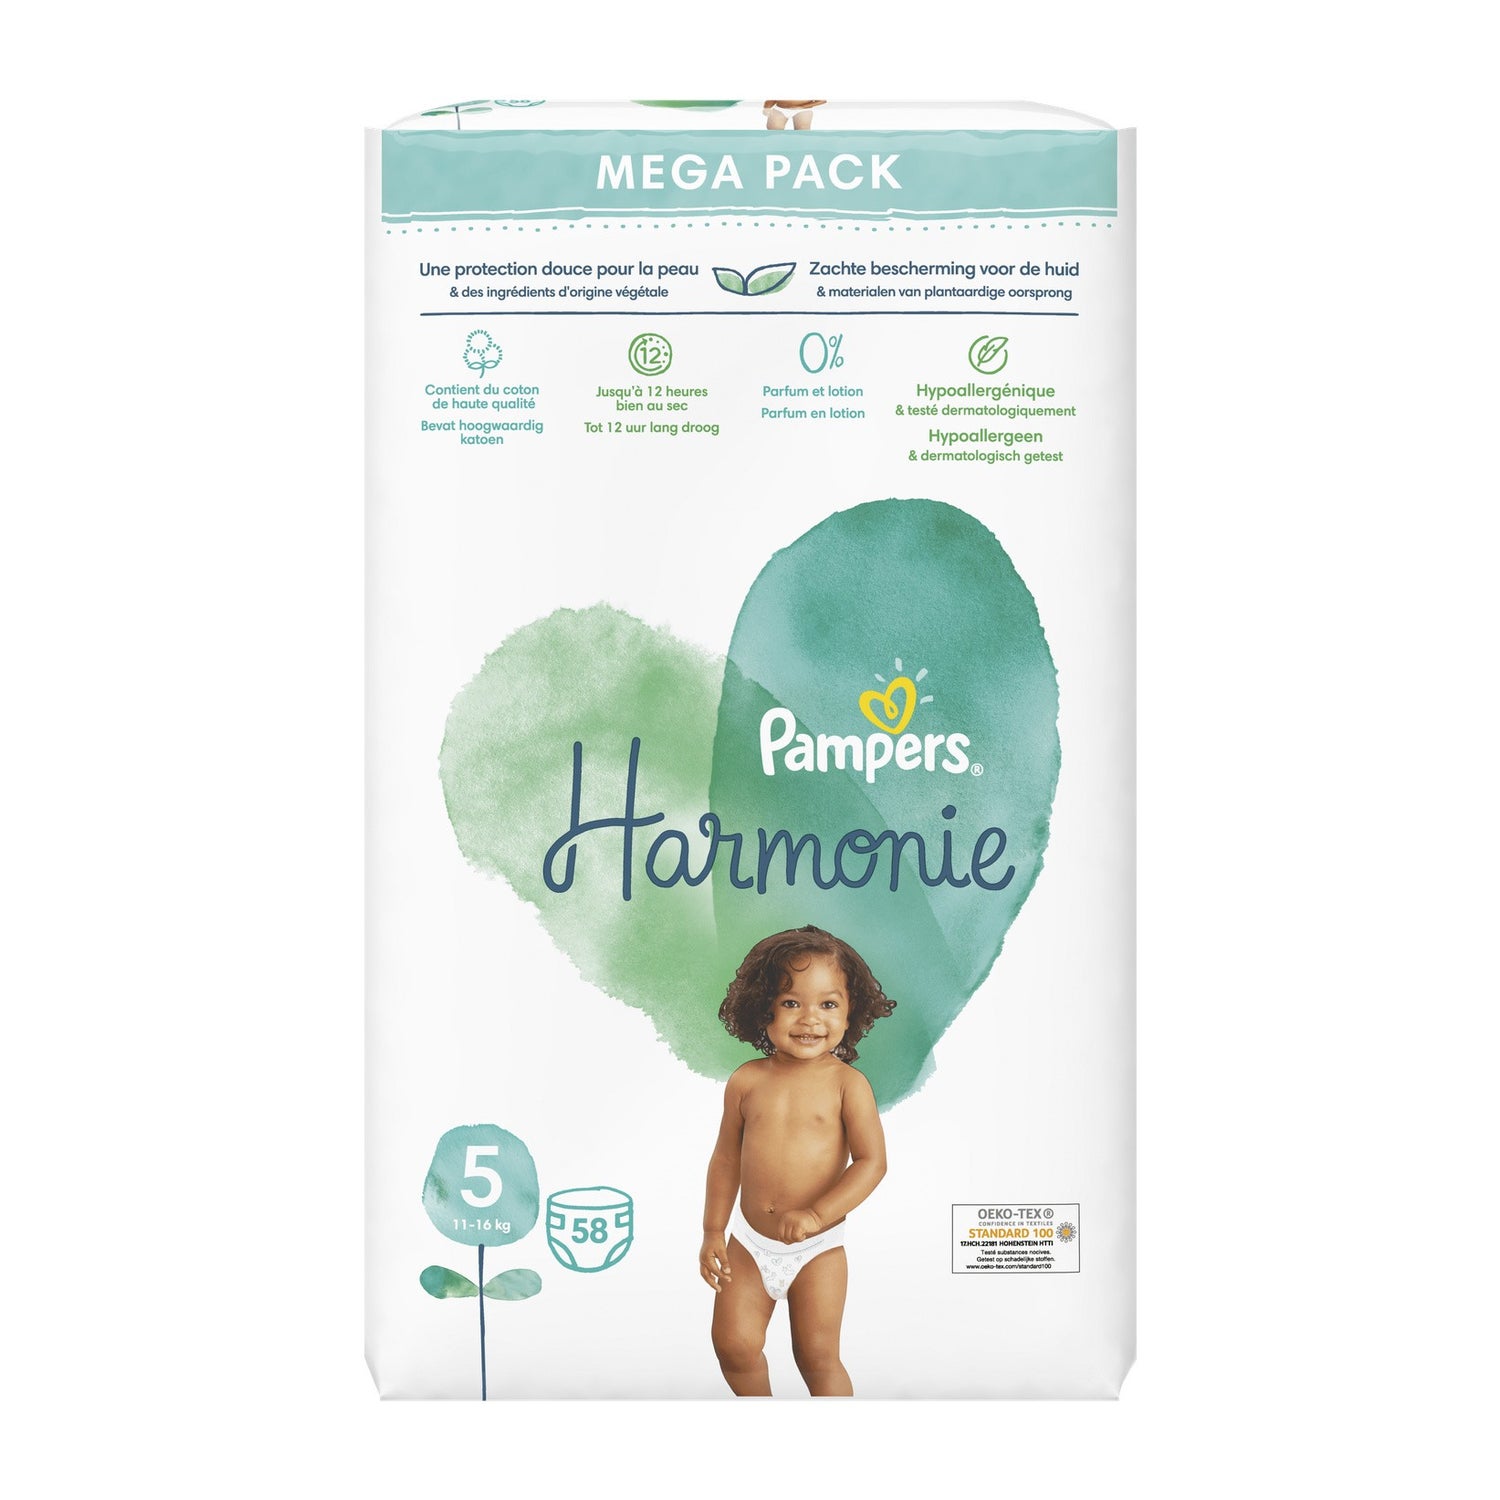 PAMPERS Premium protection couches culottes taille 5 (12-17kg) 29 couches  pas cher 